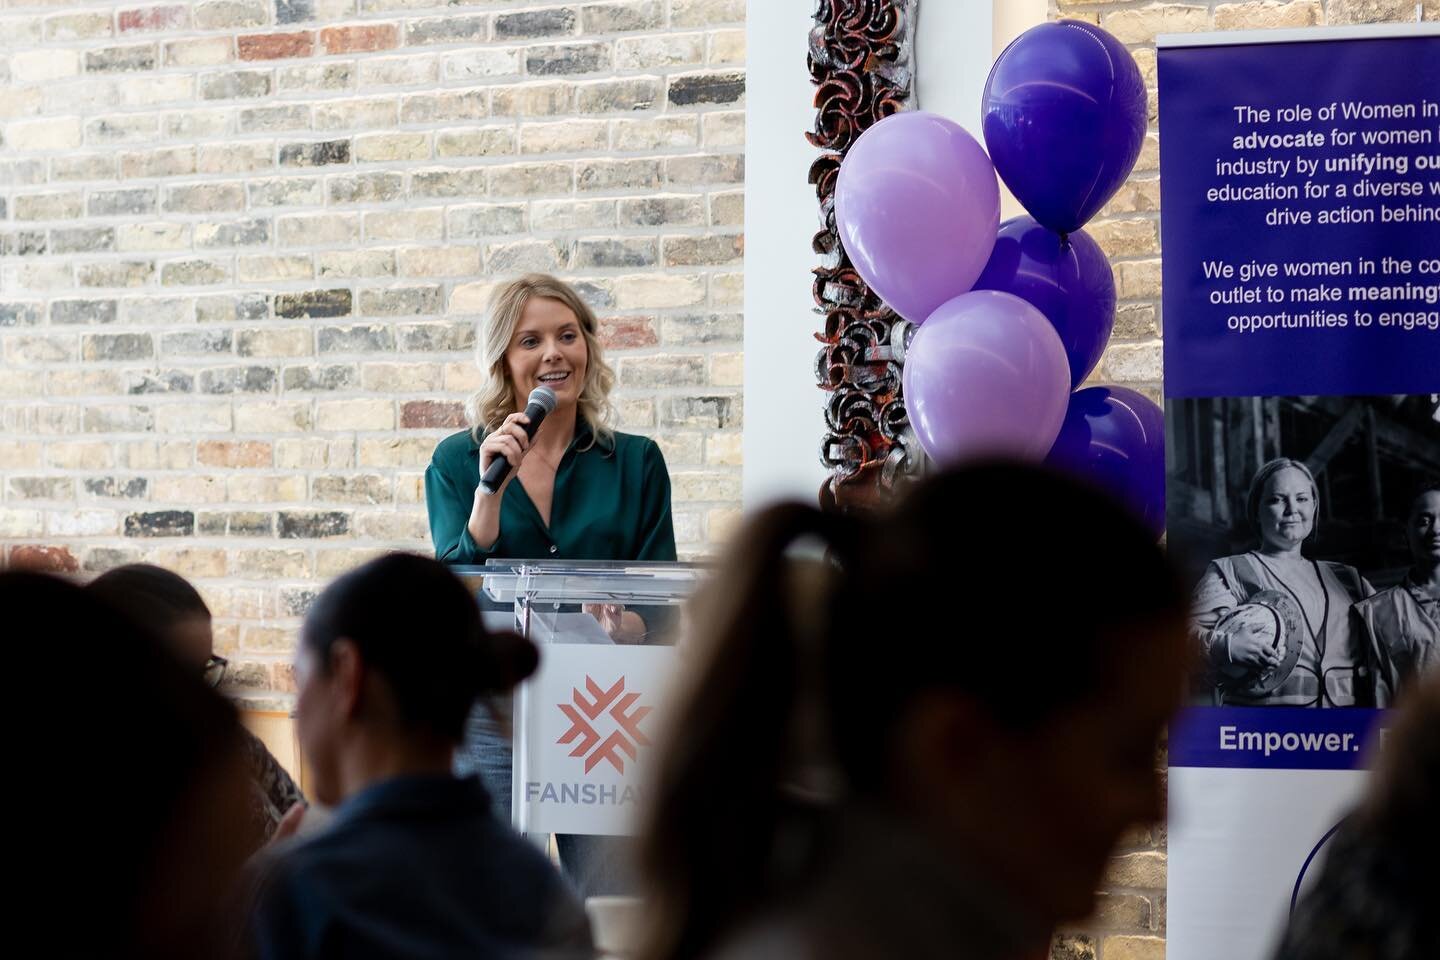 In celebration of International Women&rsquo;s Day, LDCA Women in Construction led by Chair Taylor Keck, organized a highly successful event in support of My Sister&rsquo;s Place. The event, held at The Chef&rsquo;s Table at Fanshawe, was sold out, hi